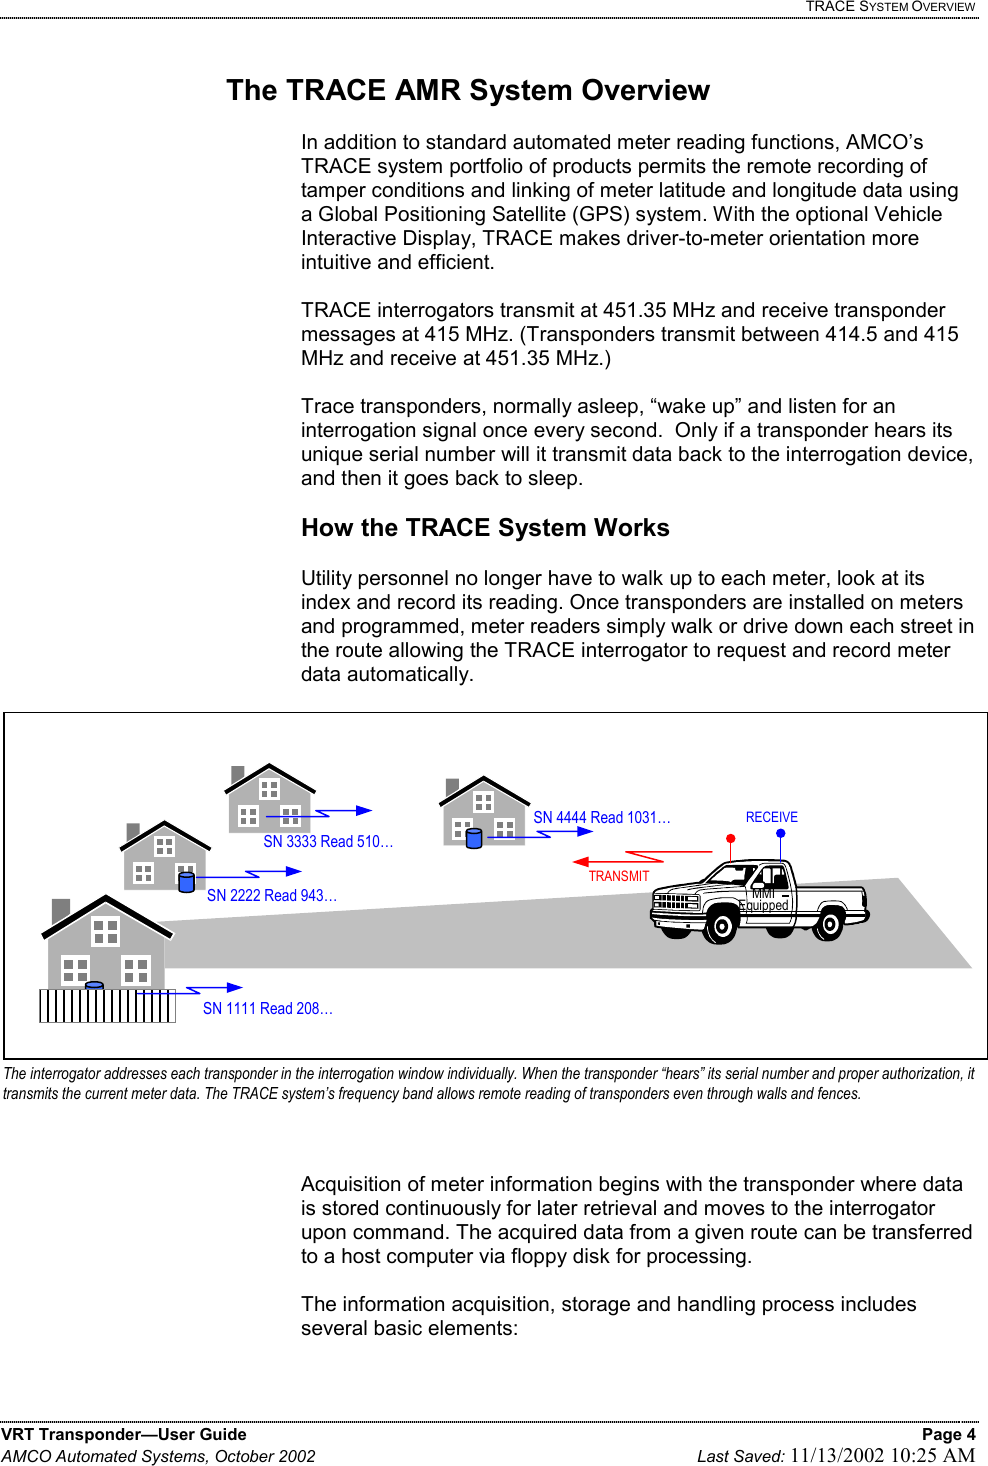   TRACE SYSTEM OVERVIEW VRT Transponder—User Guide    Page 4 AMCO Automated Systems, October 2002    Last Saved: 11/13/2002 10:25 AM   The TRACE AMR System Overview  In addition to standard automated meter reading functions, AMCO’s TRACE system portfolio of products permits the remote recording of tamper conditions and linking of meter latitude and longitude data using a Global Positioning Satellite (GPS) system. With the optional Vehicle Interactive Display, TRACE makes driver-to-meter orientation more intuitive and efficient.   TRACE interrogators transmit at 451.35 MHz and receive transponder messages at 415 MHz. (Transponders transmit between 414.5 and 415 MHz and receive at 451.35 MHz.)    Trace transponders, normally asleep, “wake up” and listen for an interrogation signal once every second.  Only if a transponder hears its unique serial number will it transmit data back to the interrogation device, and then it goes back to sleep.    How the TRACE System Works  Utility personnel no longer have to walk up to each meter, look at its index and record its reading. Once transponders are installed on meters and programmed, meter readers simply walk or drive down each street in the route allowing the TRACE interrogator to request and record meter data automatically.  Acquisition of meter information begins with the transponder where data is stored continuously for later retrieval and moves to the interrogator upon command. The acquired data from a given route can be transferred to a host computer via floppy disk for processing.  The information acquisition, storage and handling process includes several basic elements:  SN 1111 Read 208… SN 2222 Read 943… MMI Equipped SN 3333 Read 510… SN 4444 Read 1031… TRANSMITRECEIVEThe interrogator addresses each transponder in the interrogation window individually. When the transponder “hears” its serial number and proper authorization, it transmits the current meter data. The TRACE system’s frequency band allows remote reading of transponders even through walls and fences.  